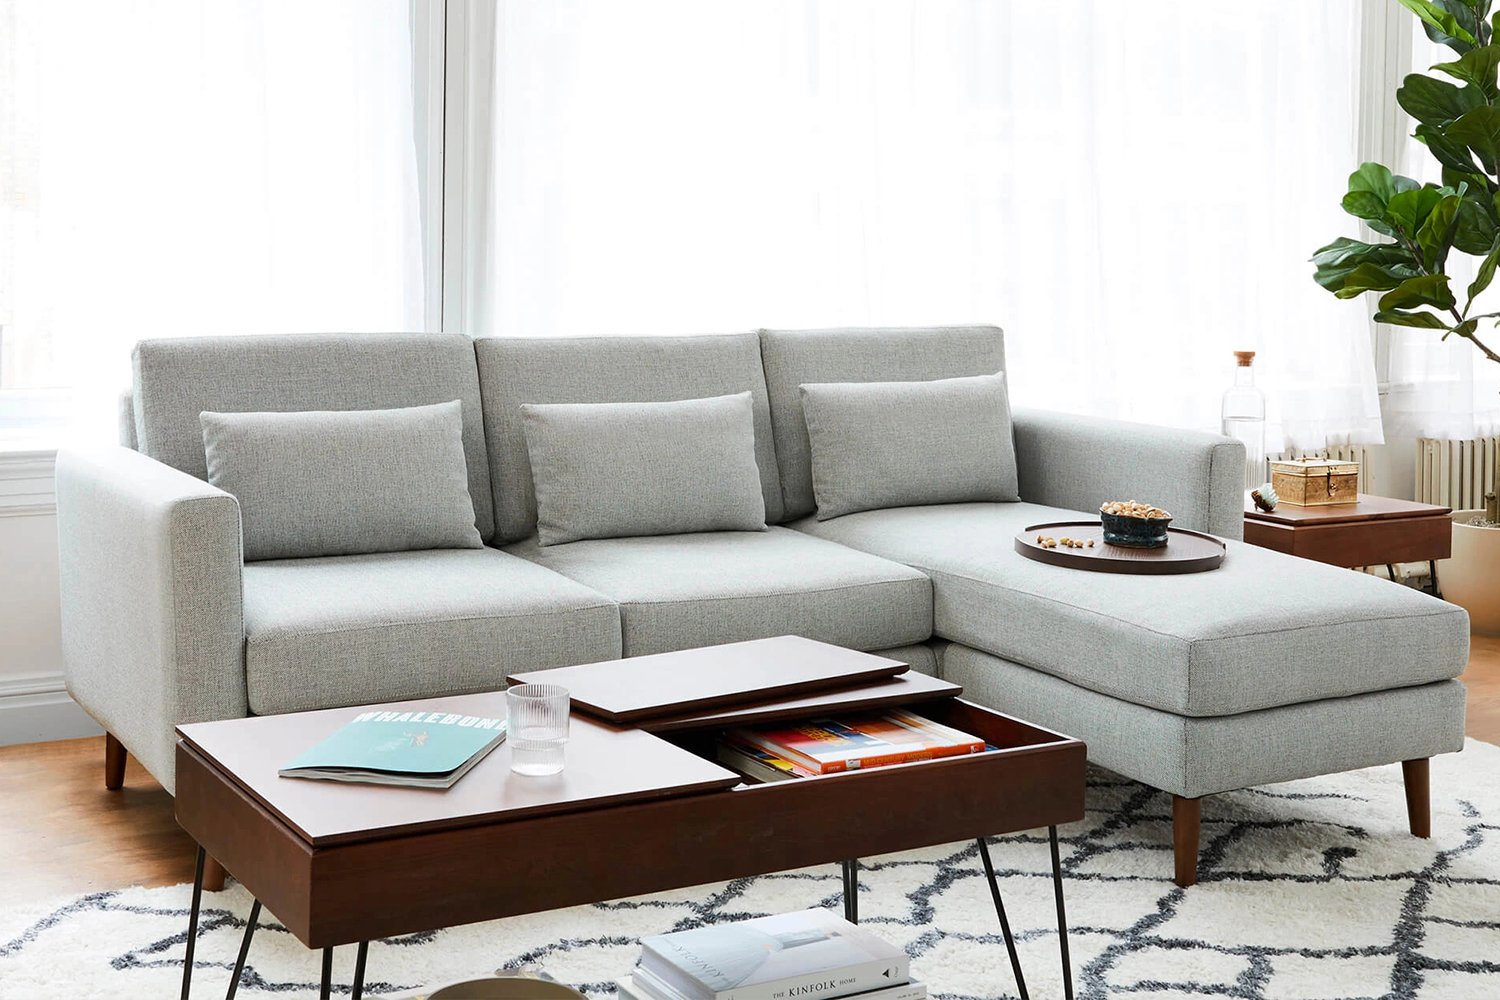 A grey Nomad couch from direct-to-consumer furniture company Burrow